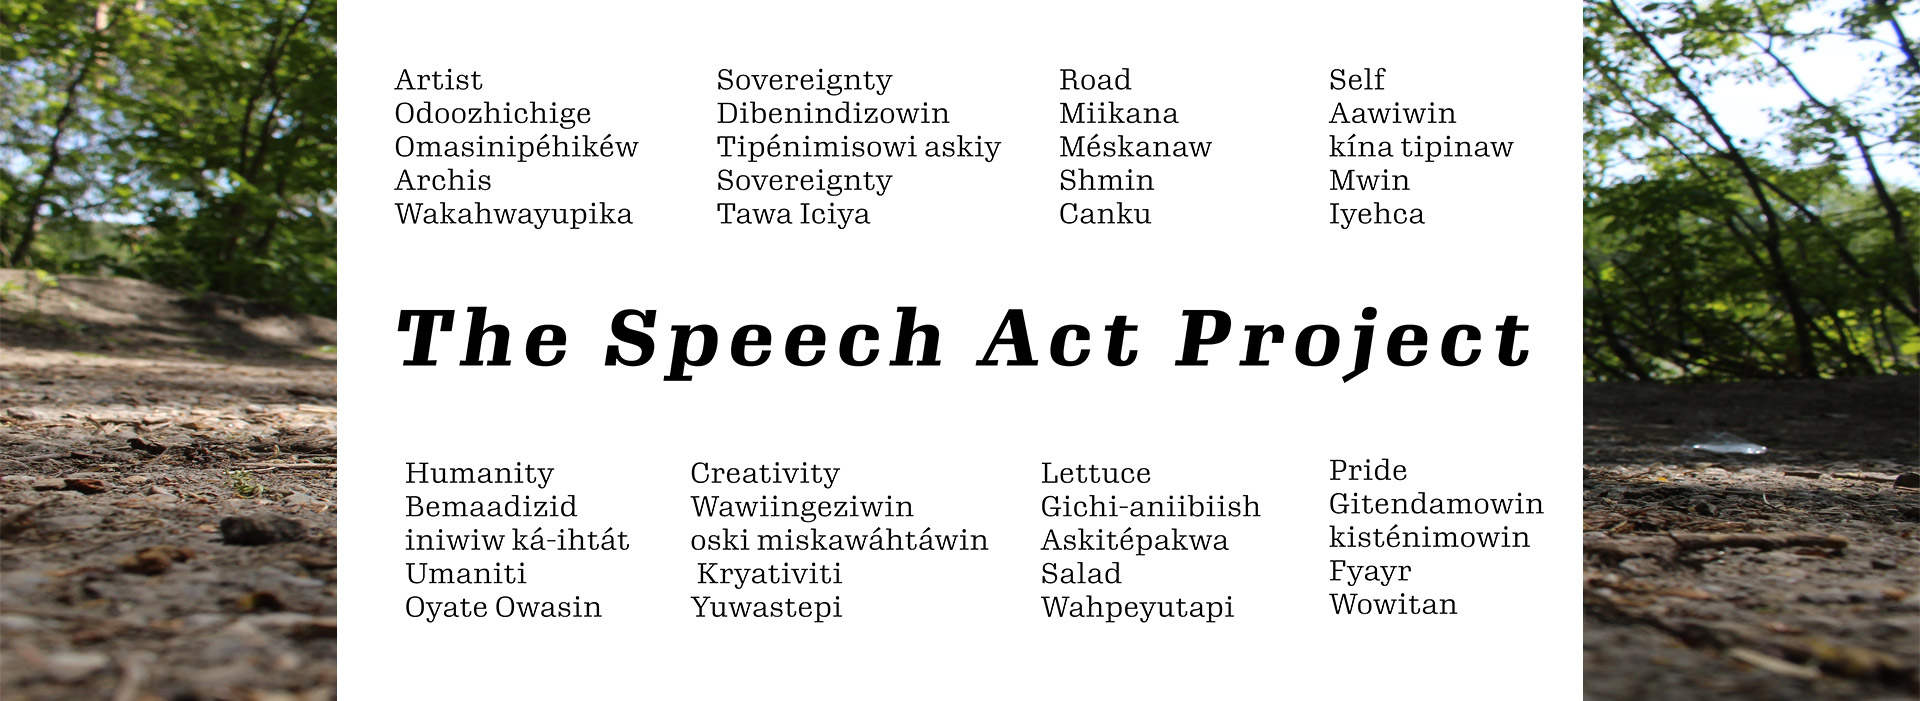 The Speech Act Project and campaign